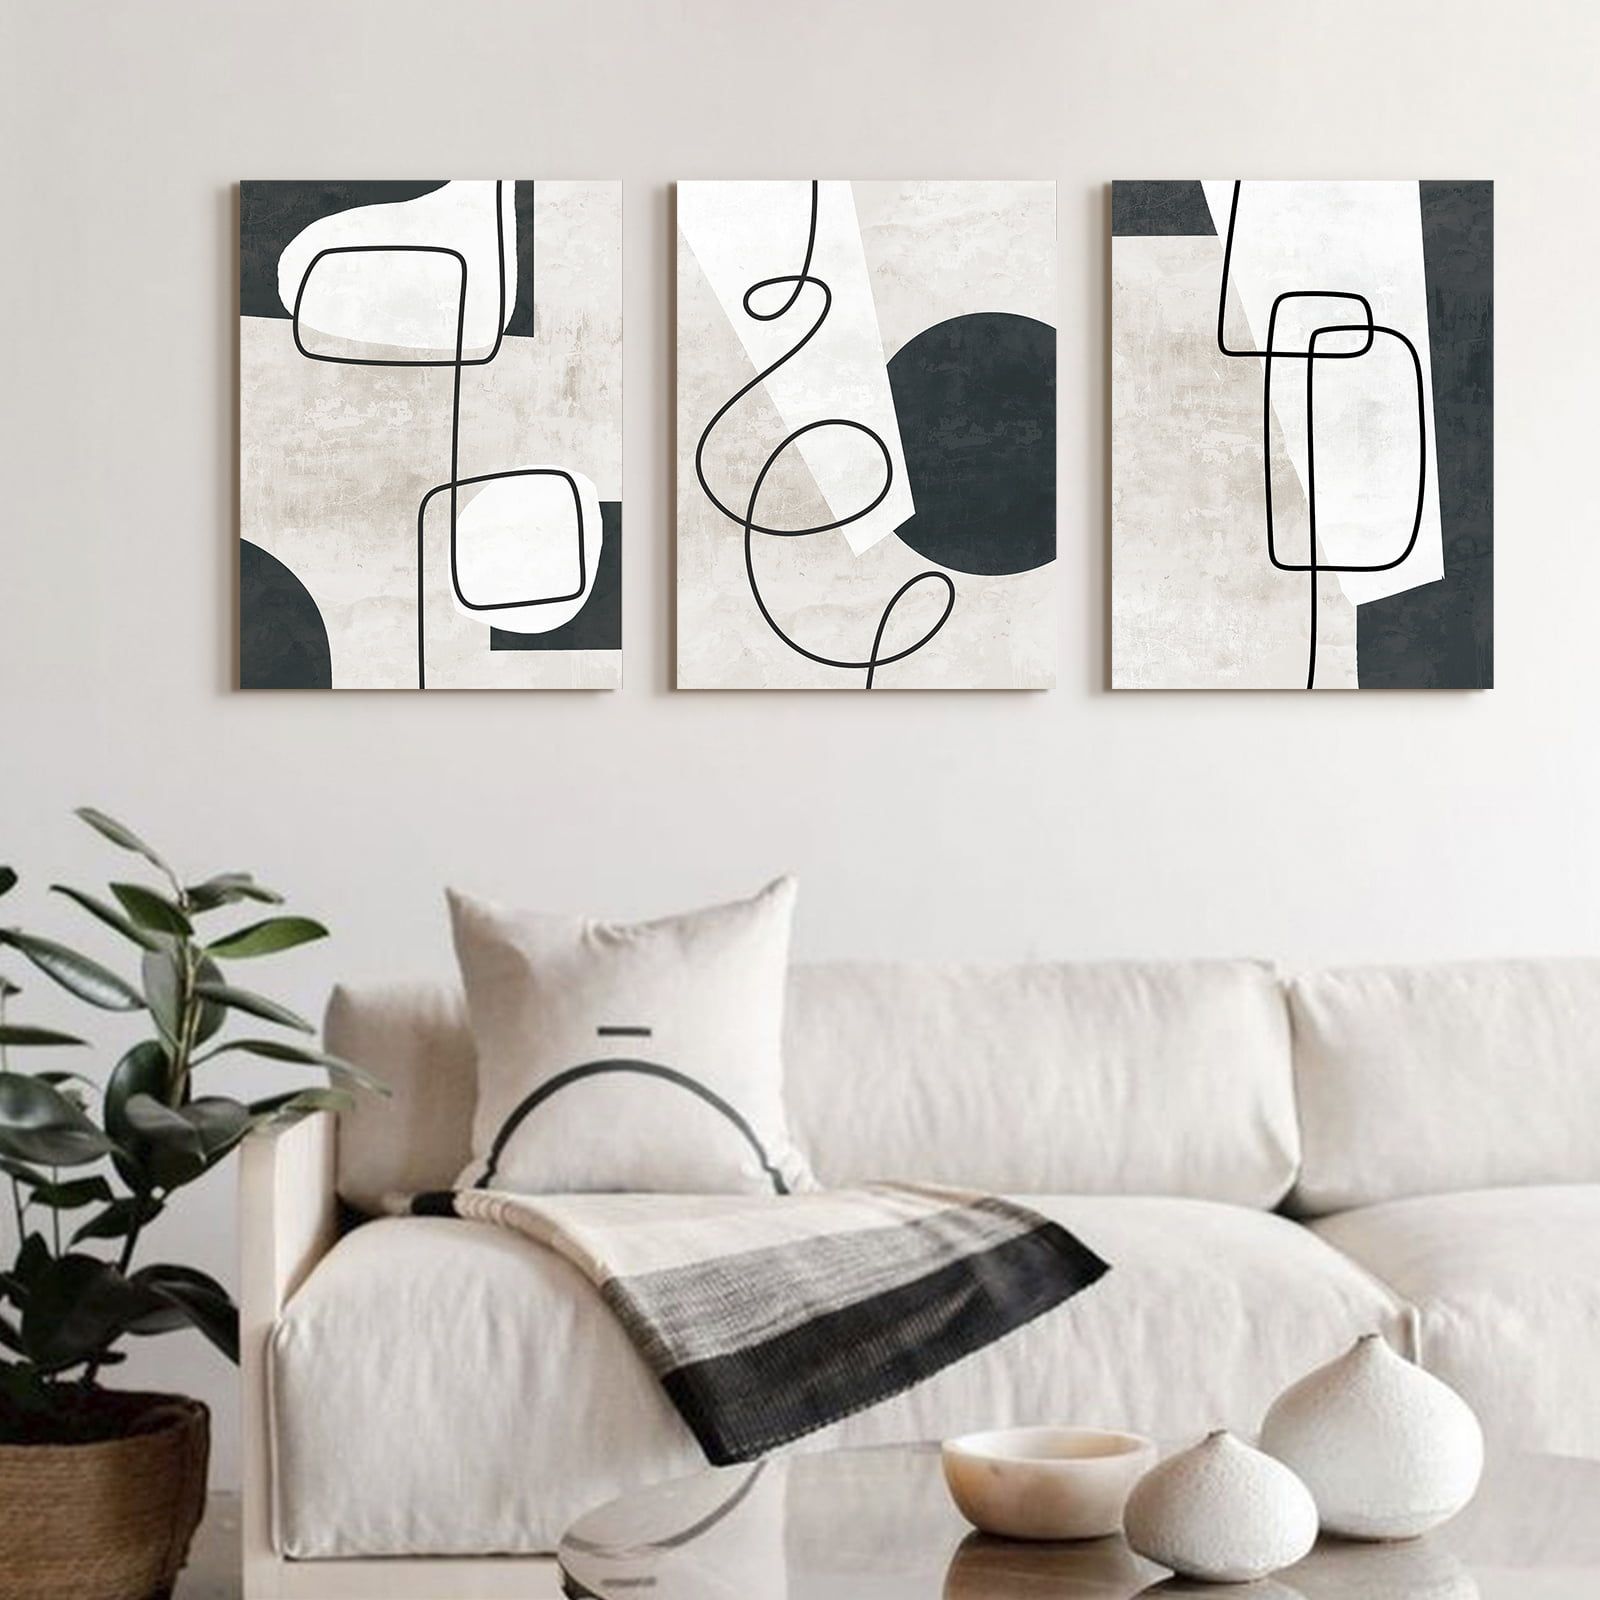 Artbyhannah 3 Pieces 16x24 Inch Modern Abstract Wall Art Decor, Black And  White Canvas Wall Print Set With Minimalist Art Prints For Living Room –  Walmart Inside 2018 Black Minimalist Wall Art (Gallery 4 of 20)